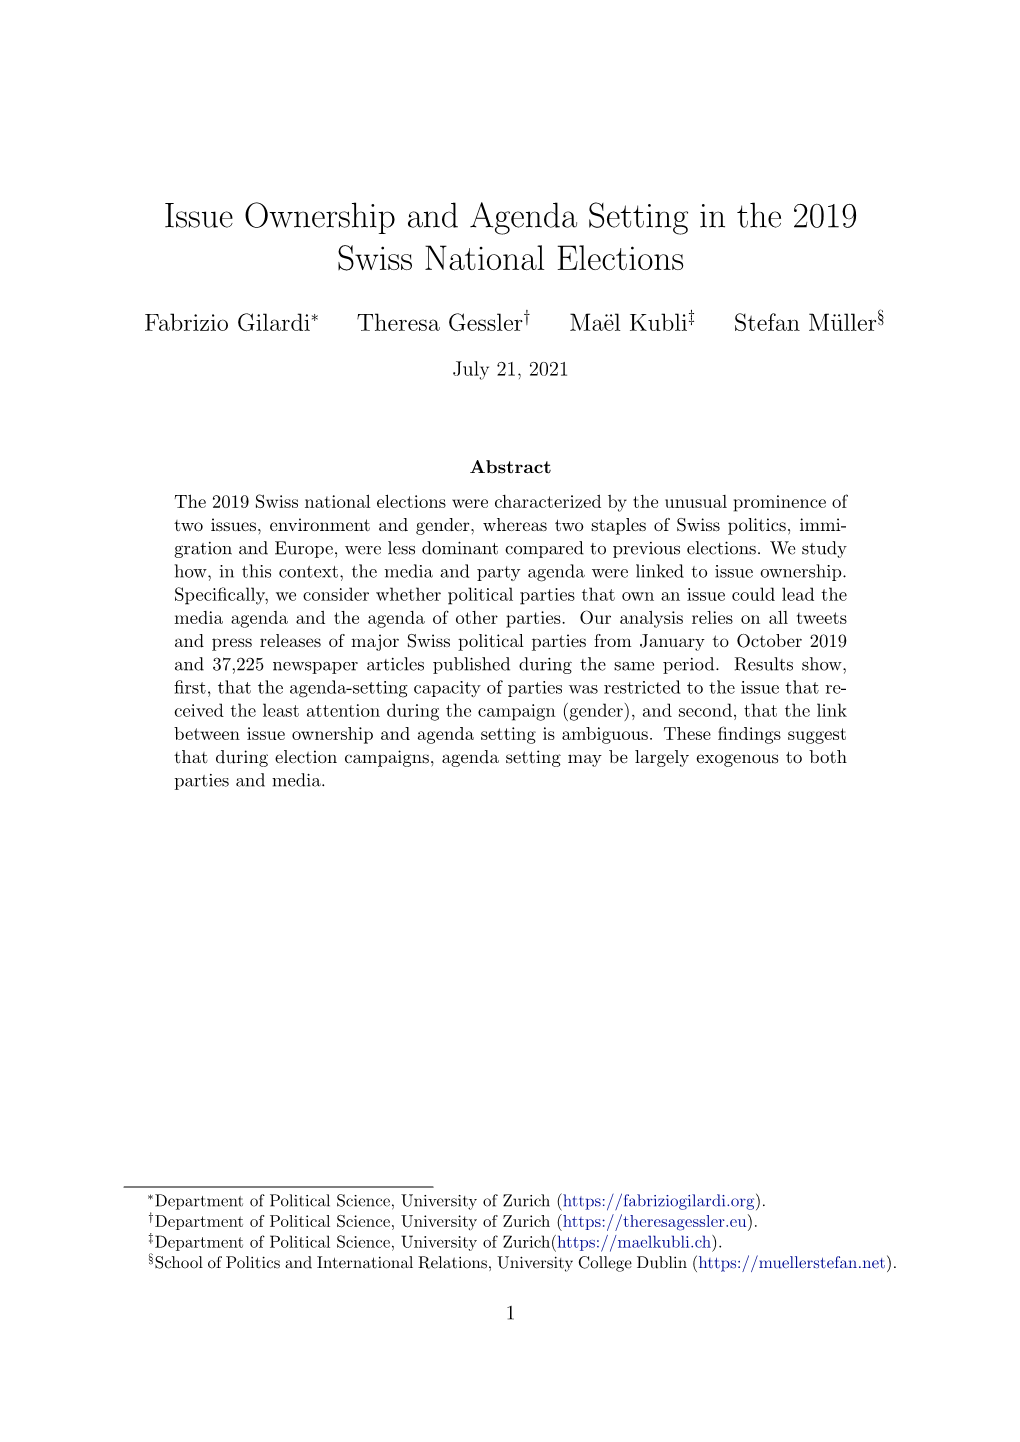 Issue Ownership and Agenda Setting in the 2019 Swiss National Elections